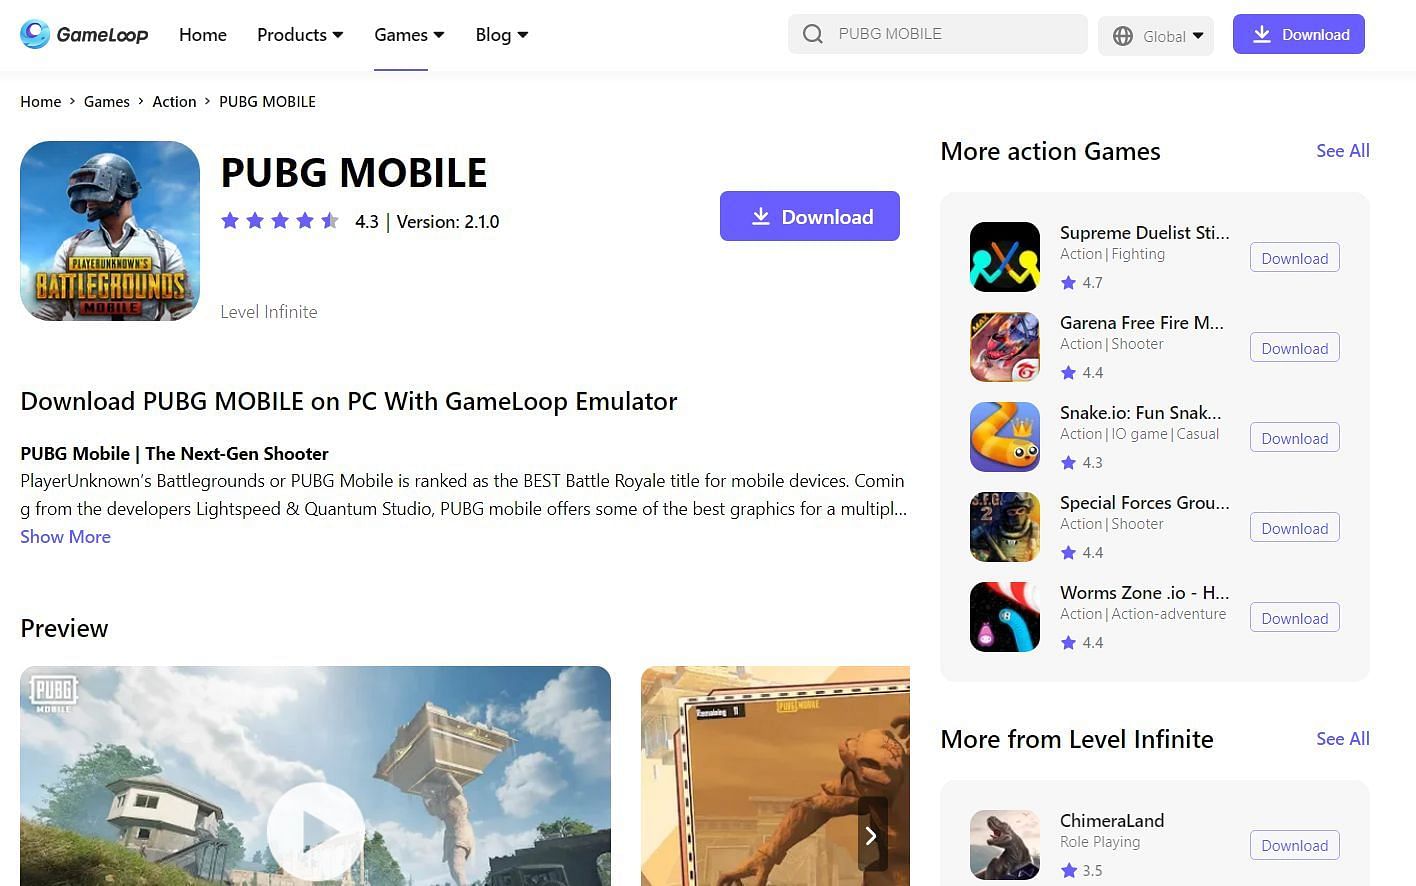 Users can install an emulator like Gameloop to download PUBG Mobile on their PCs (Image via Gameloop)